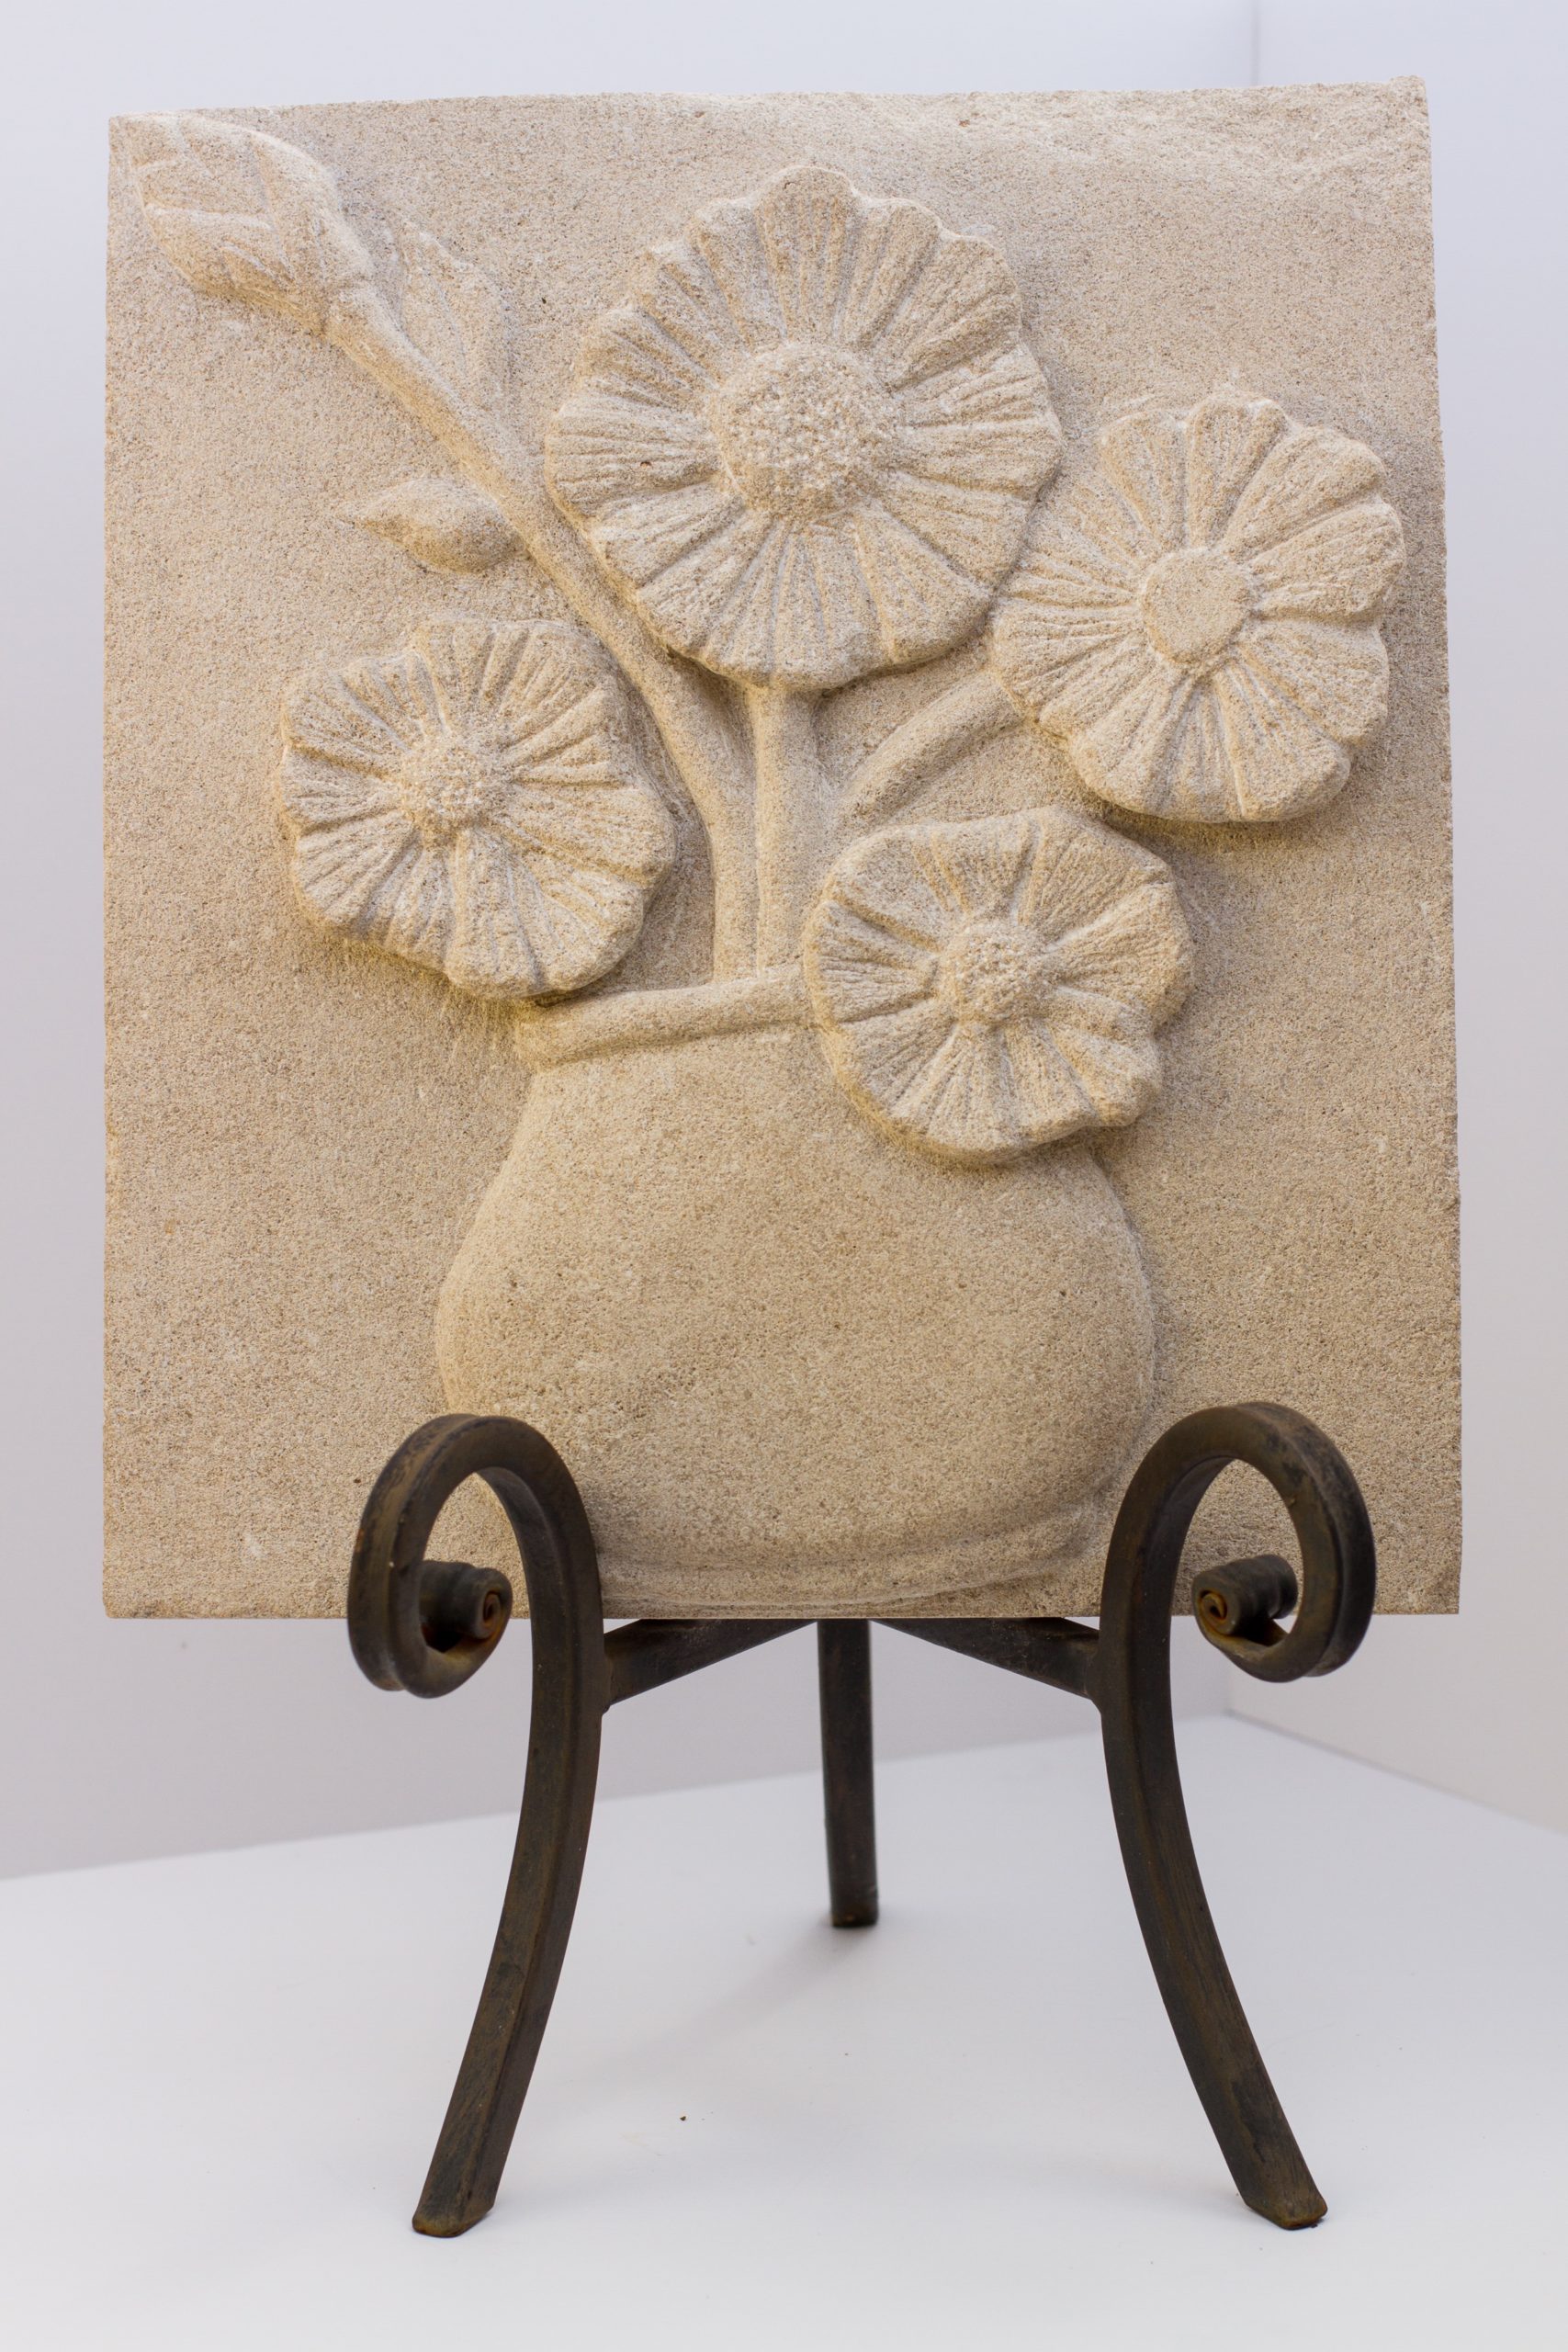 Limestone Floral Relief, "Flowers for Nancy" by Adrian Hoye